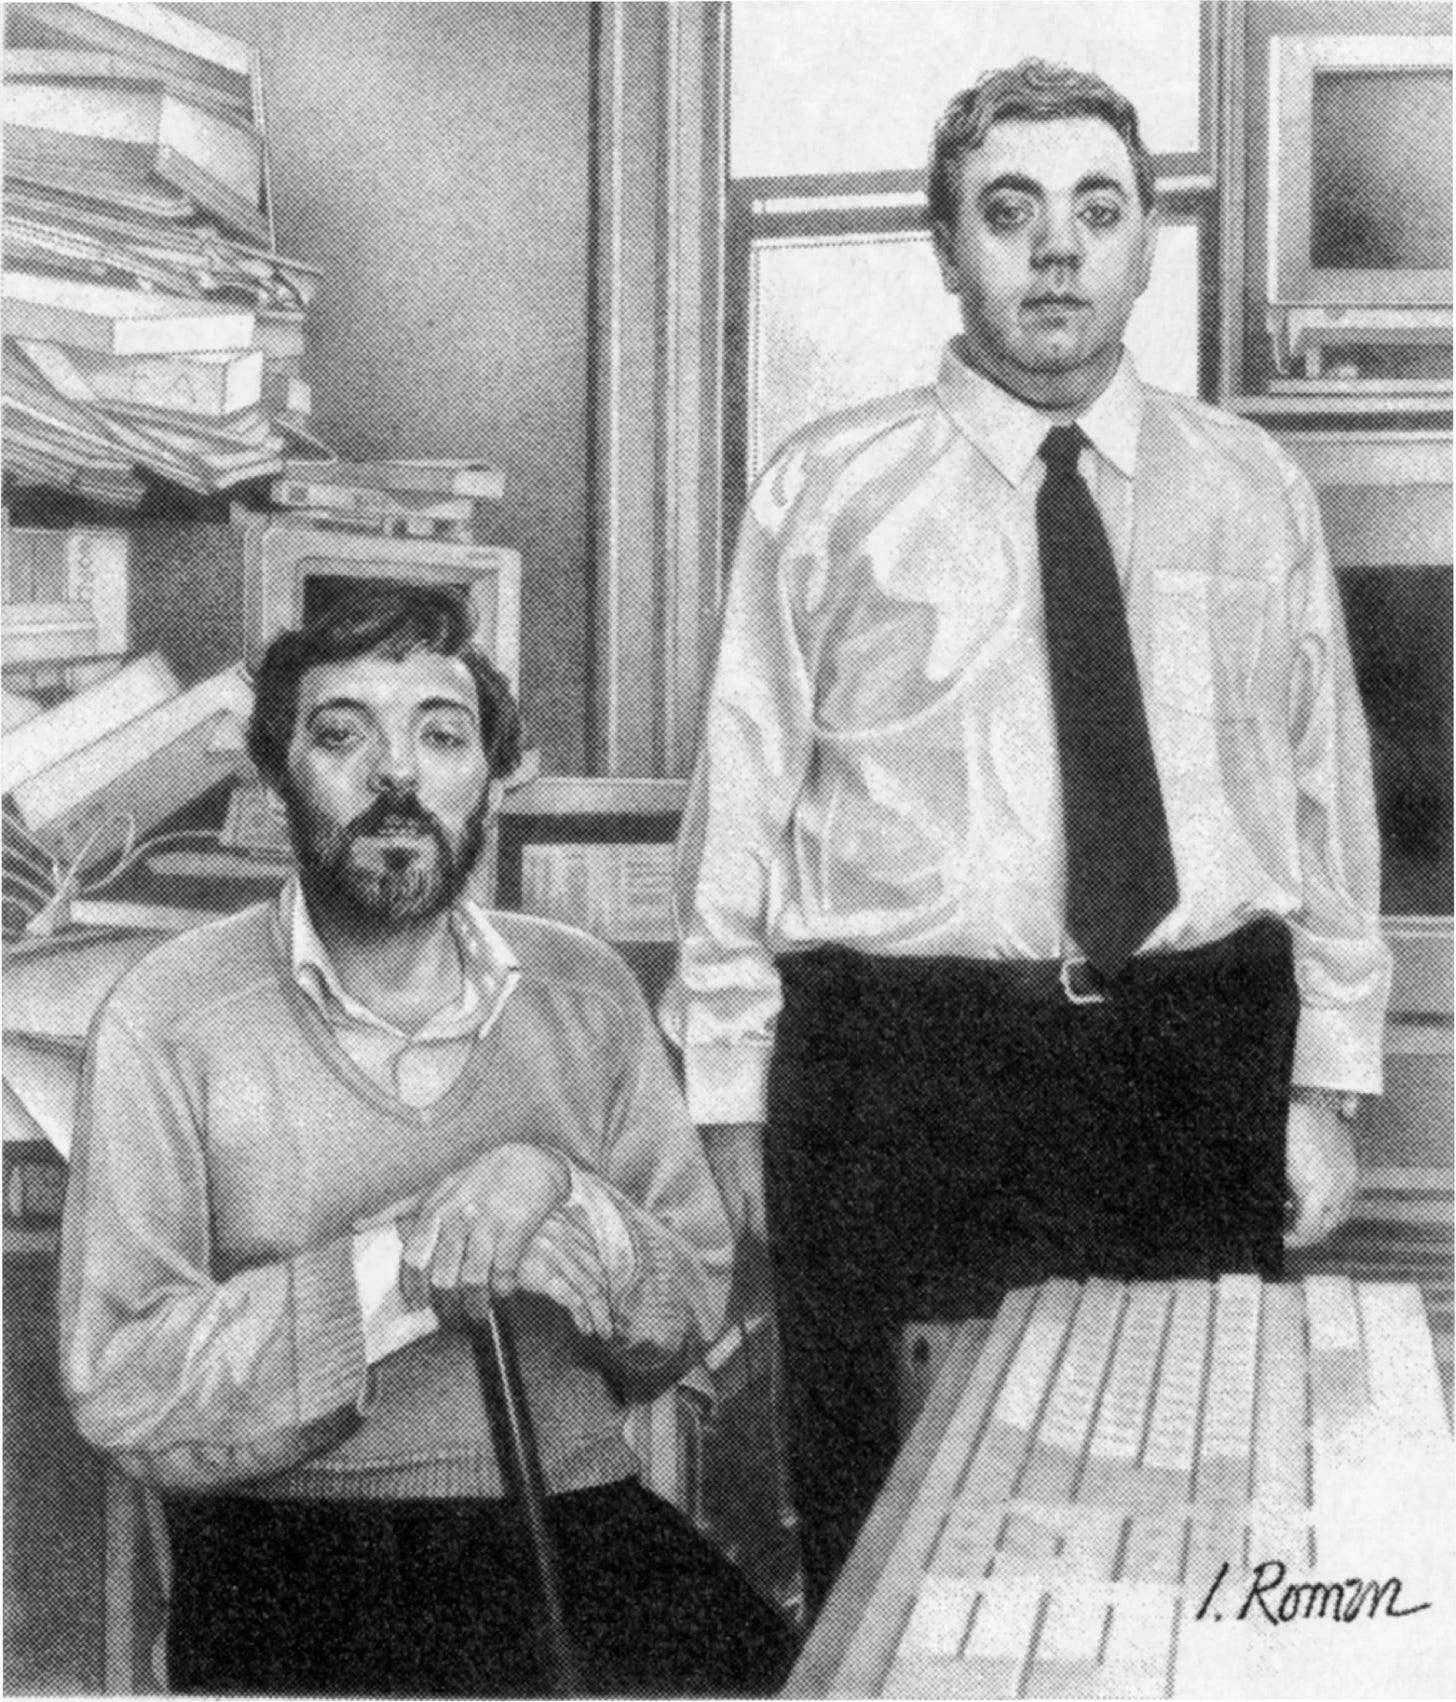 Two middle aged men in a room full of papers and computers. One man holds a cane.